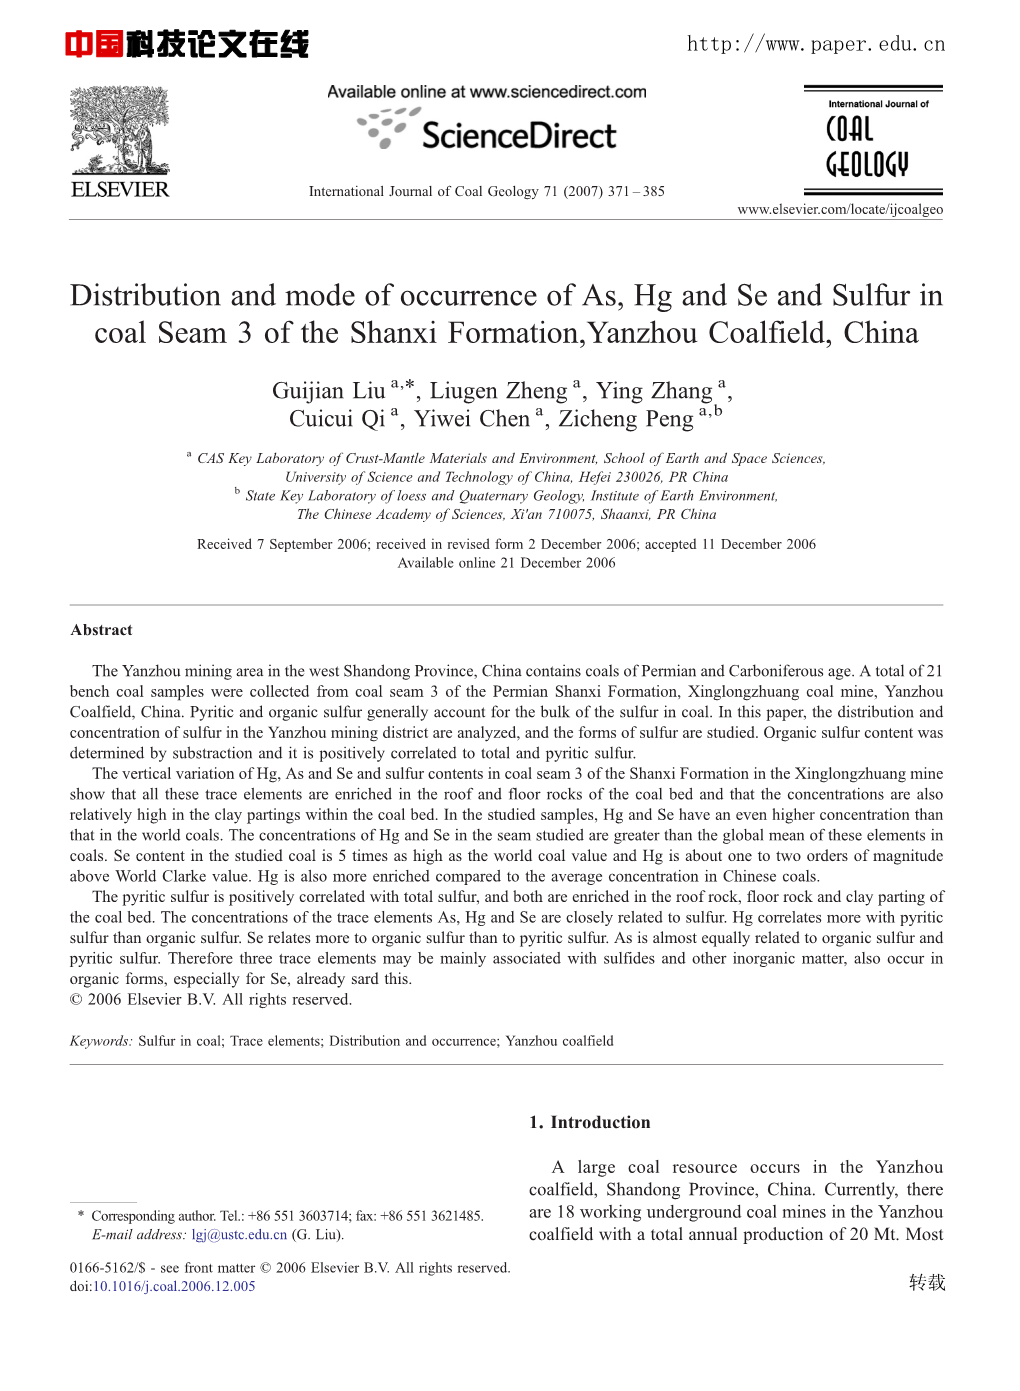 Distribution and Mode of Occurrence of As, Hg and Se and Sulfur in Coal